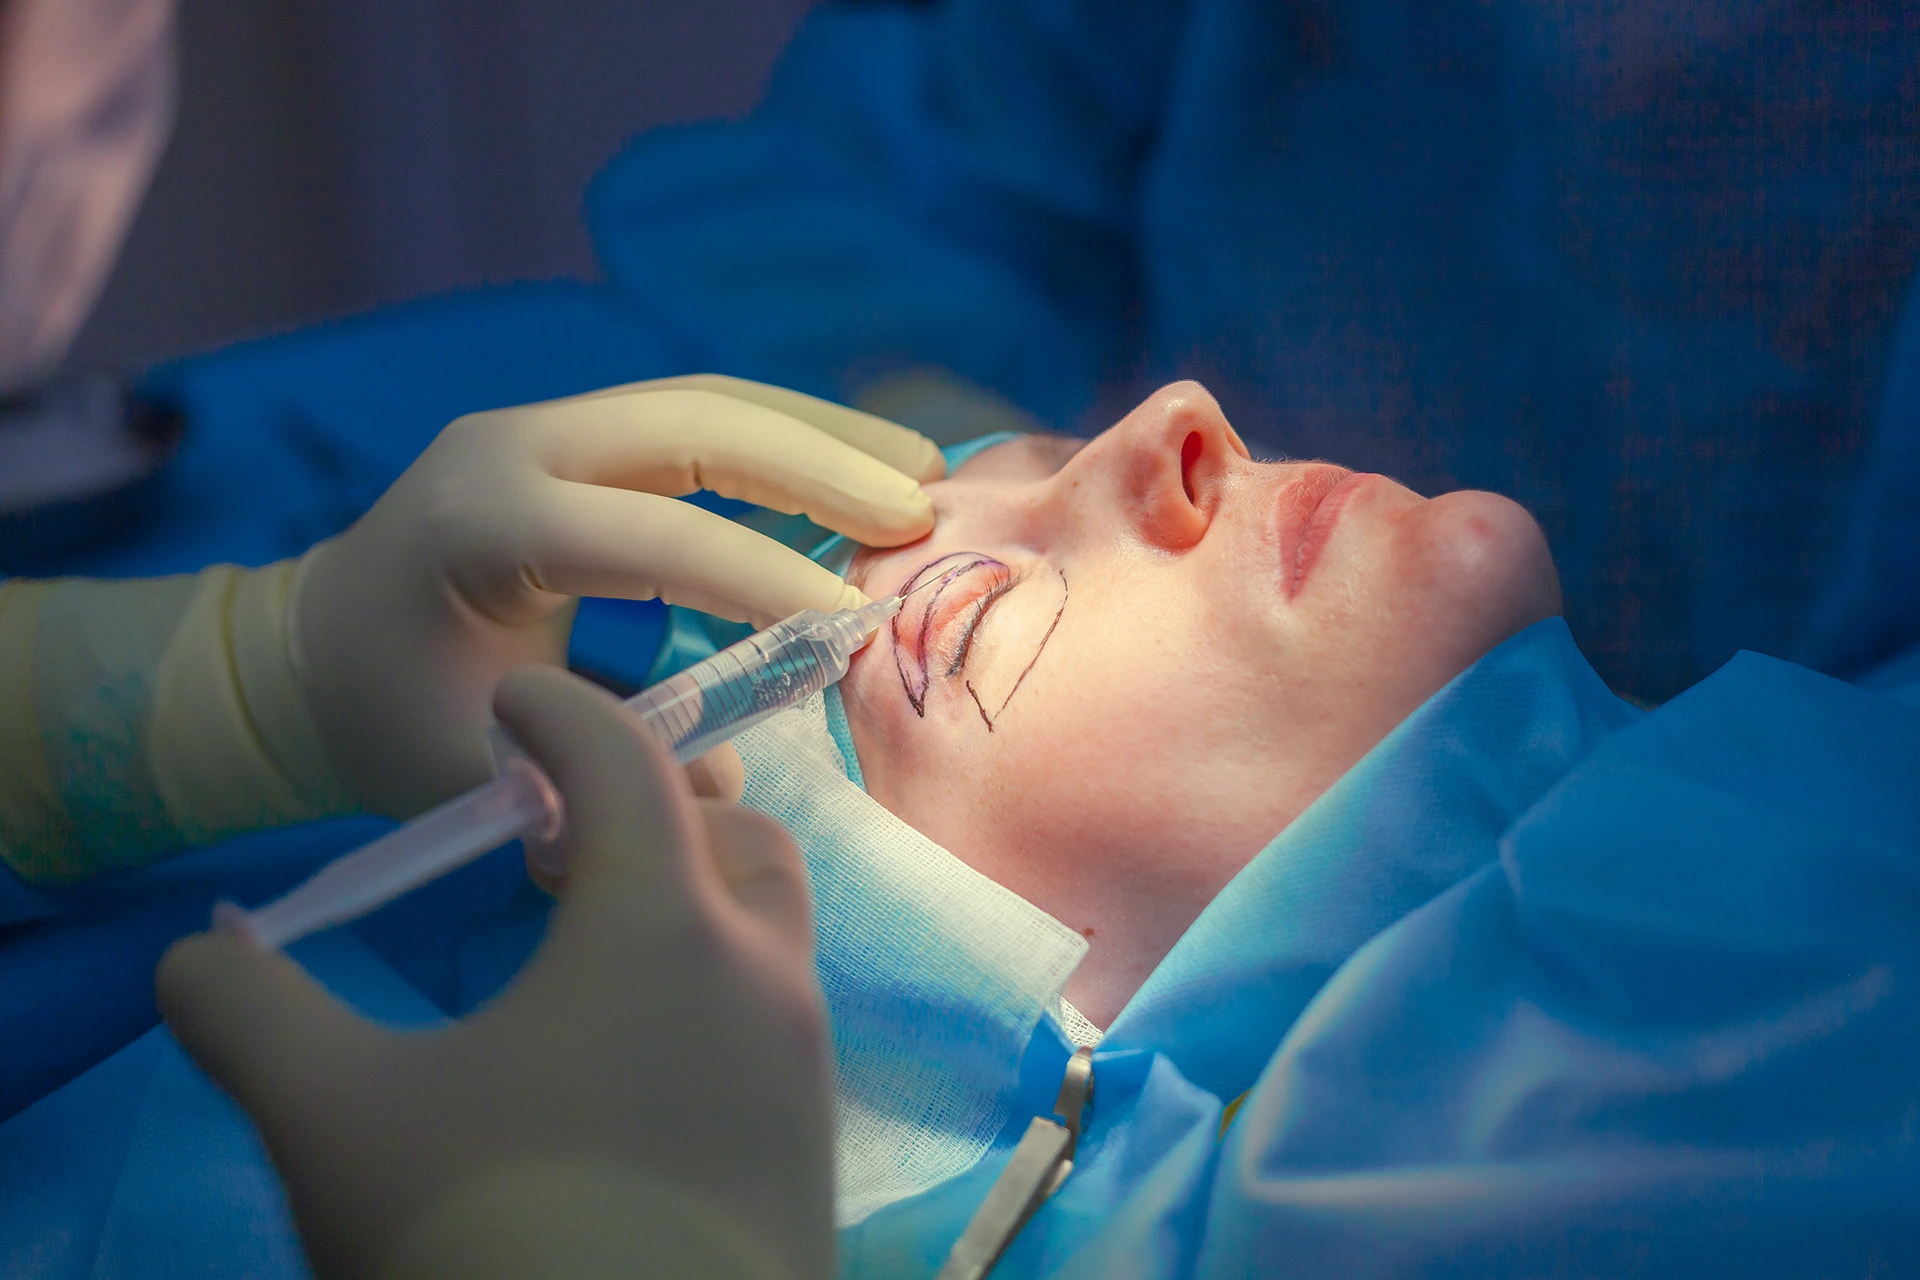 A patient undergoing a cosmetic procedure with injections around the eye area.